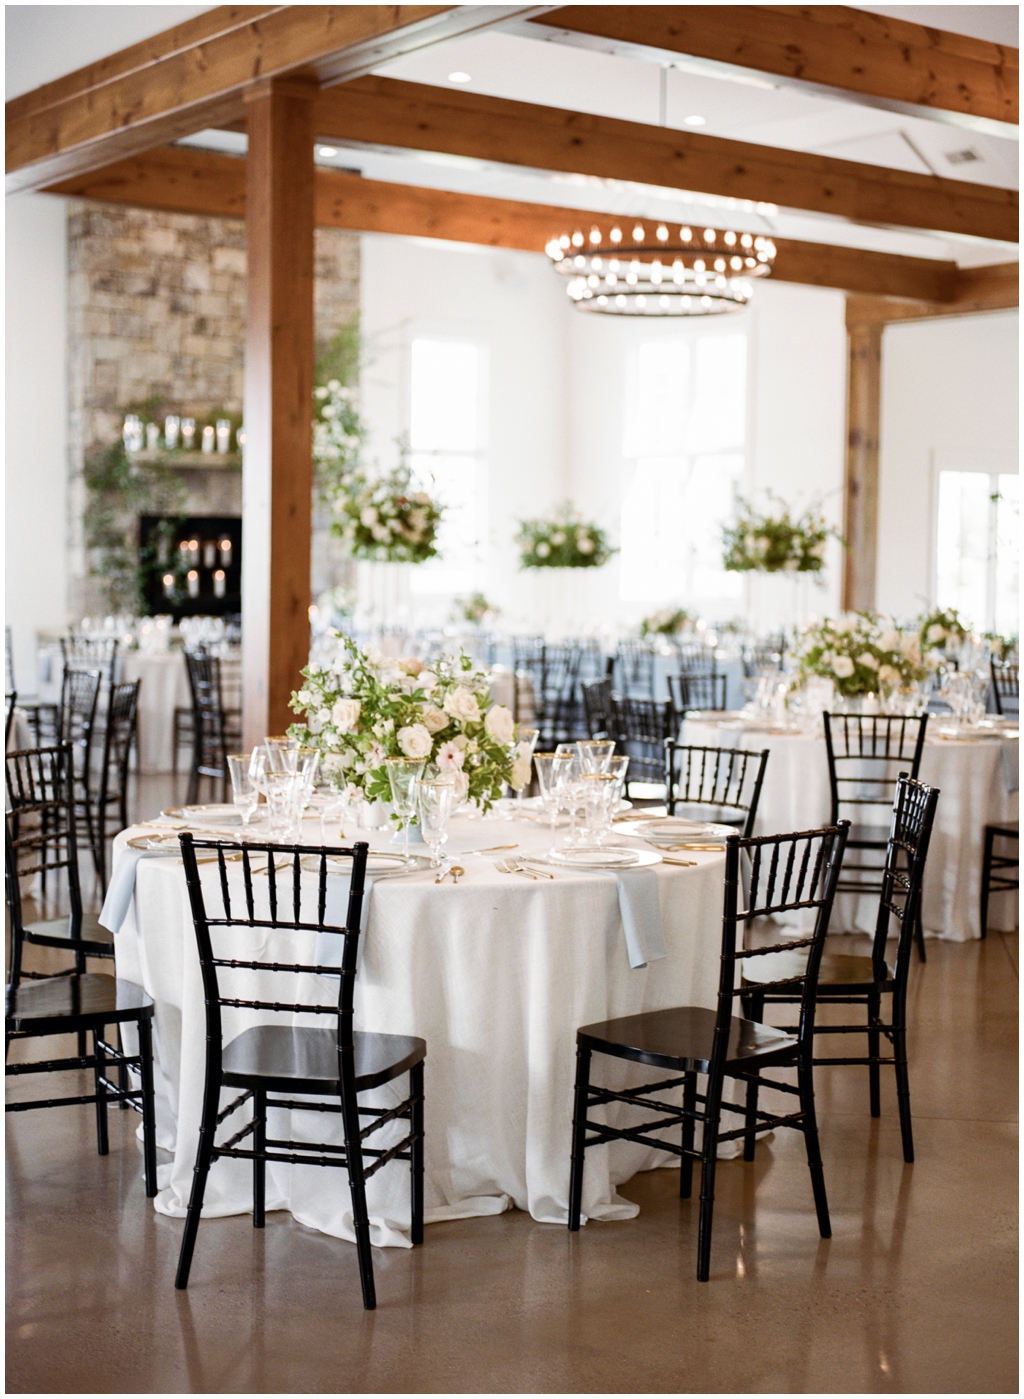 Timeless, simple indoor wedding reception decorated with lots of fresh greenery and roses at Marblegate Farm. 